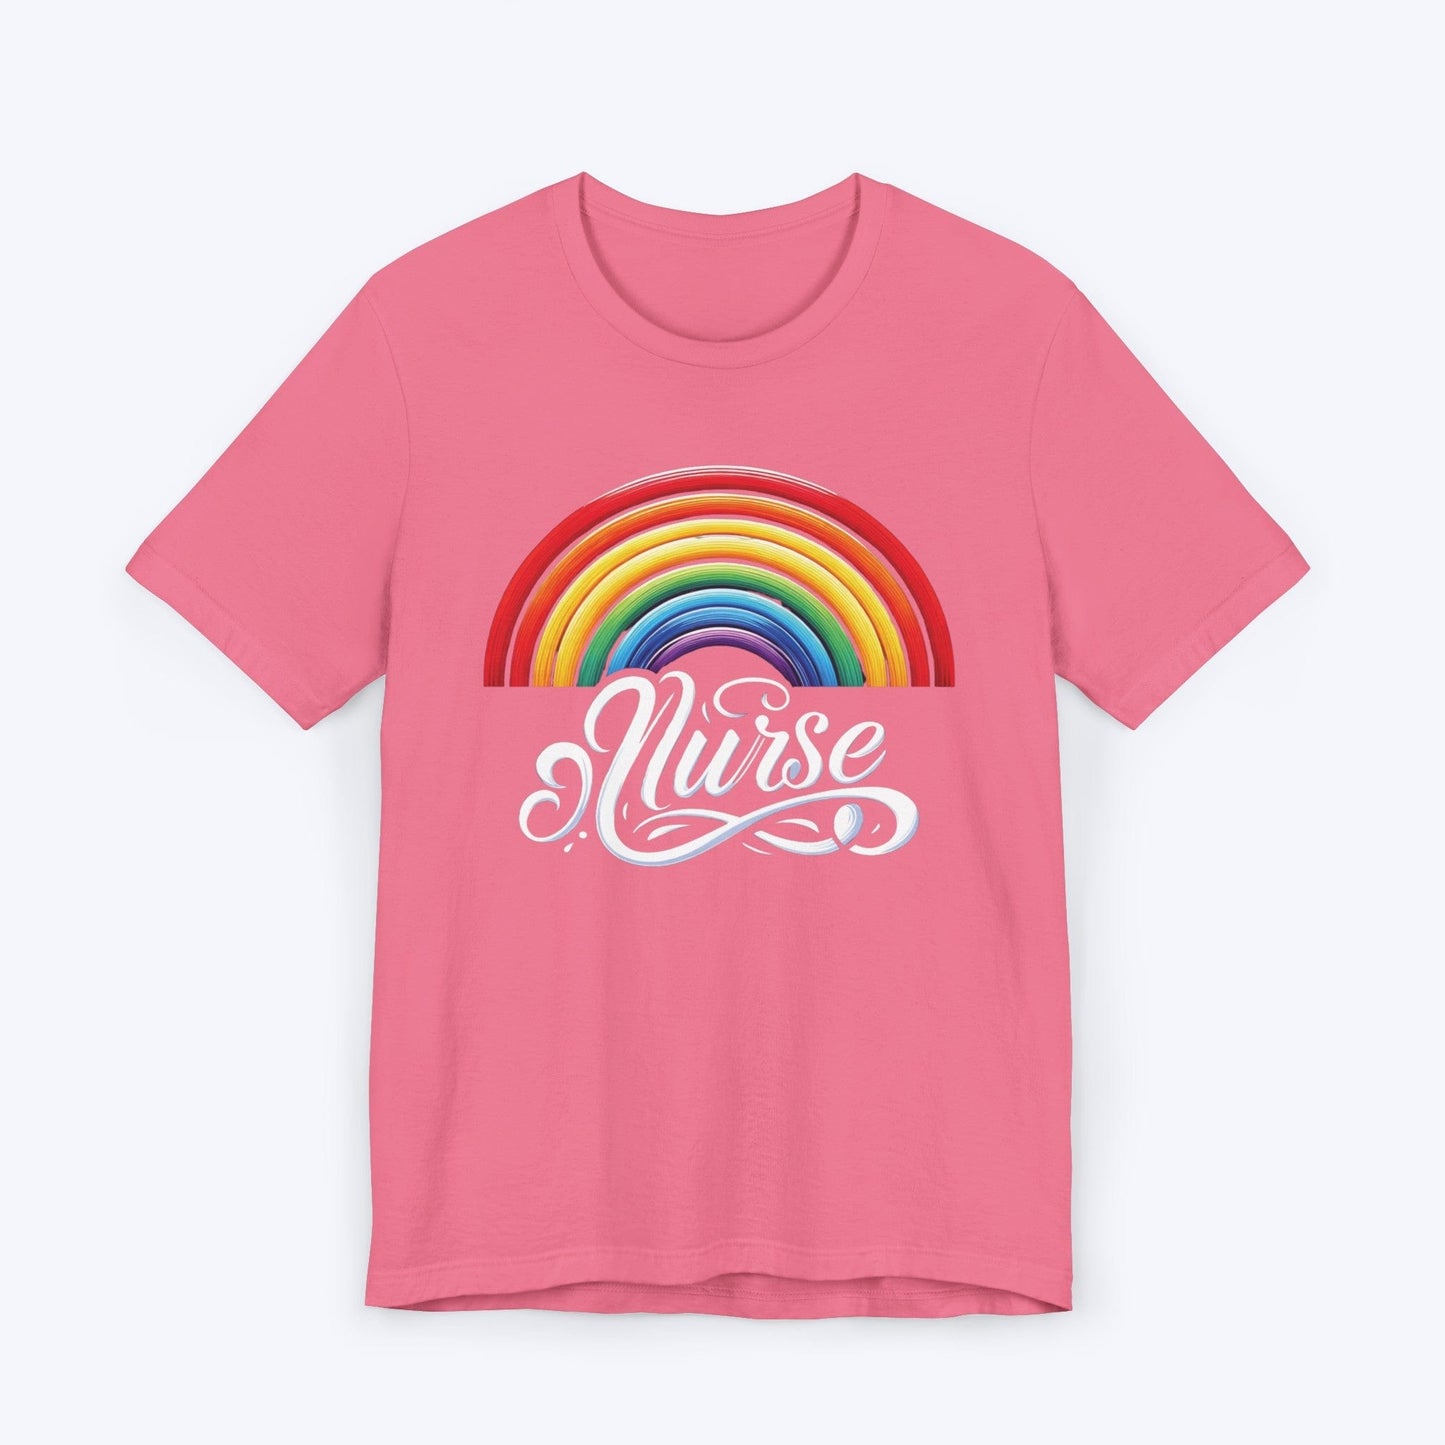 T-Shirt Charity Pink / S Spectrum of Compassion: Nurse Pride T-shirt